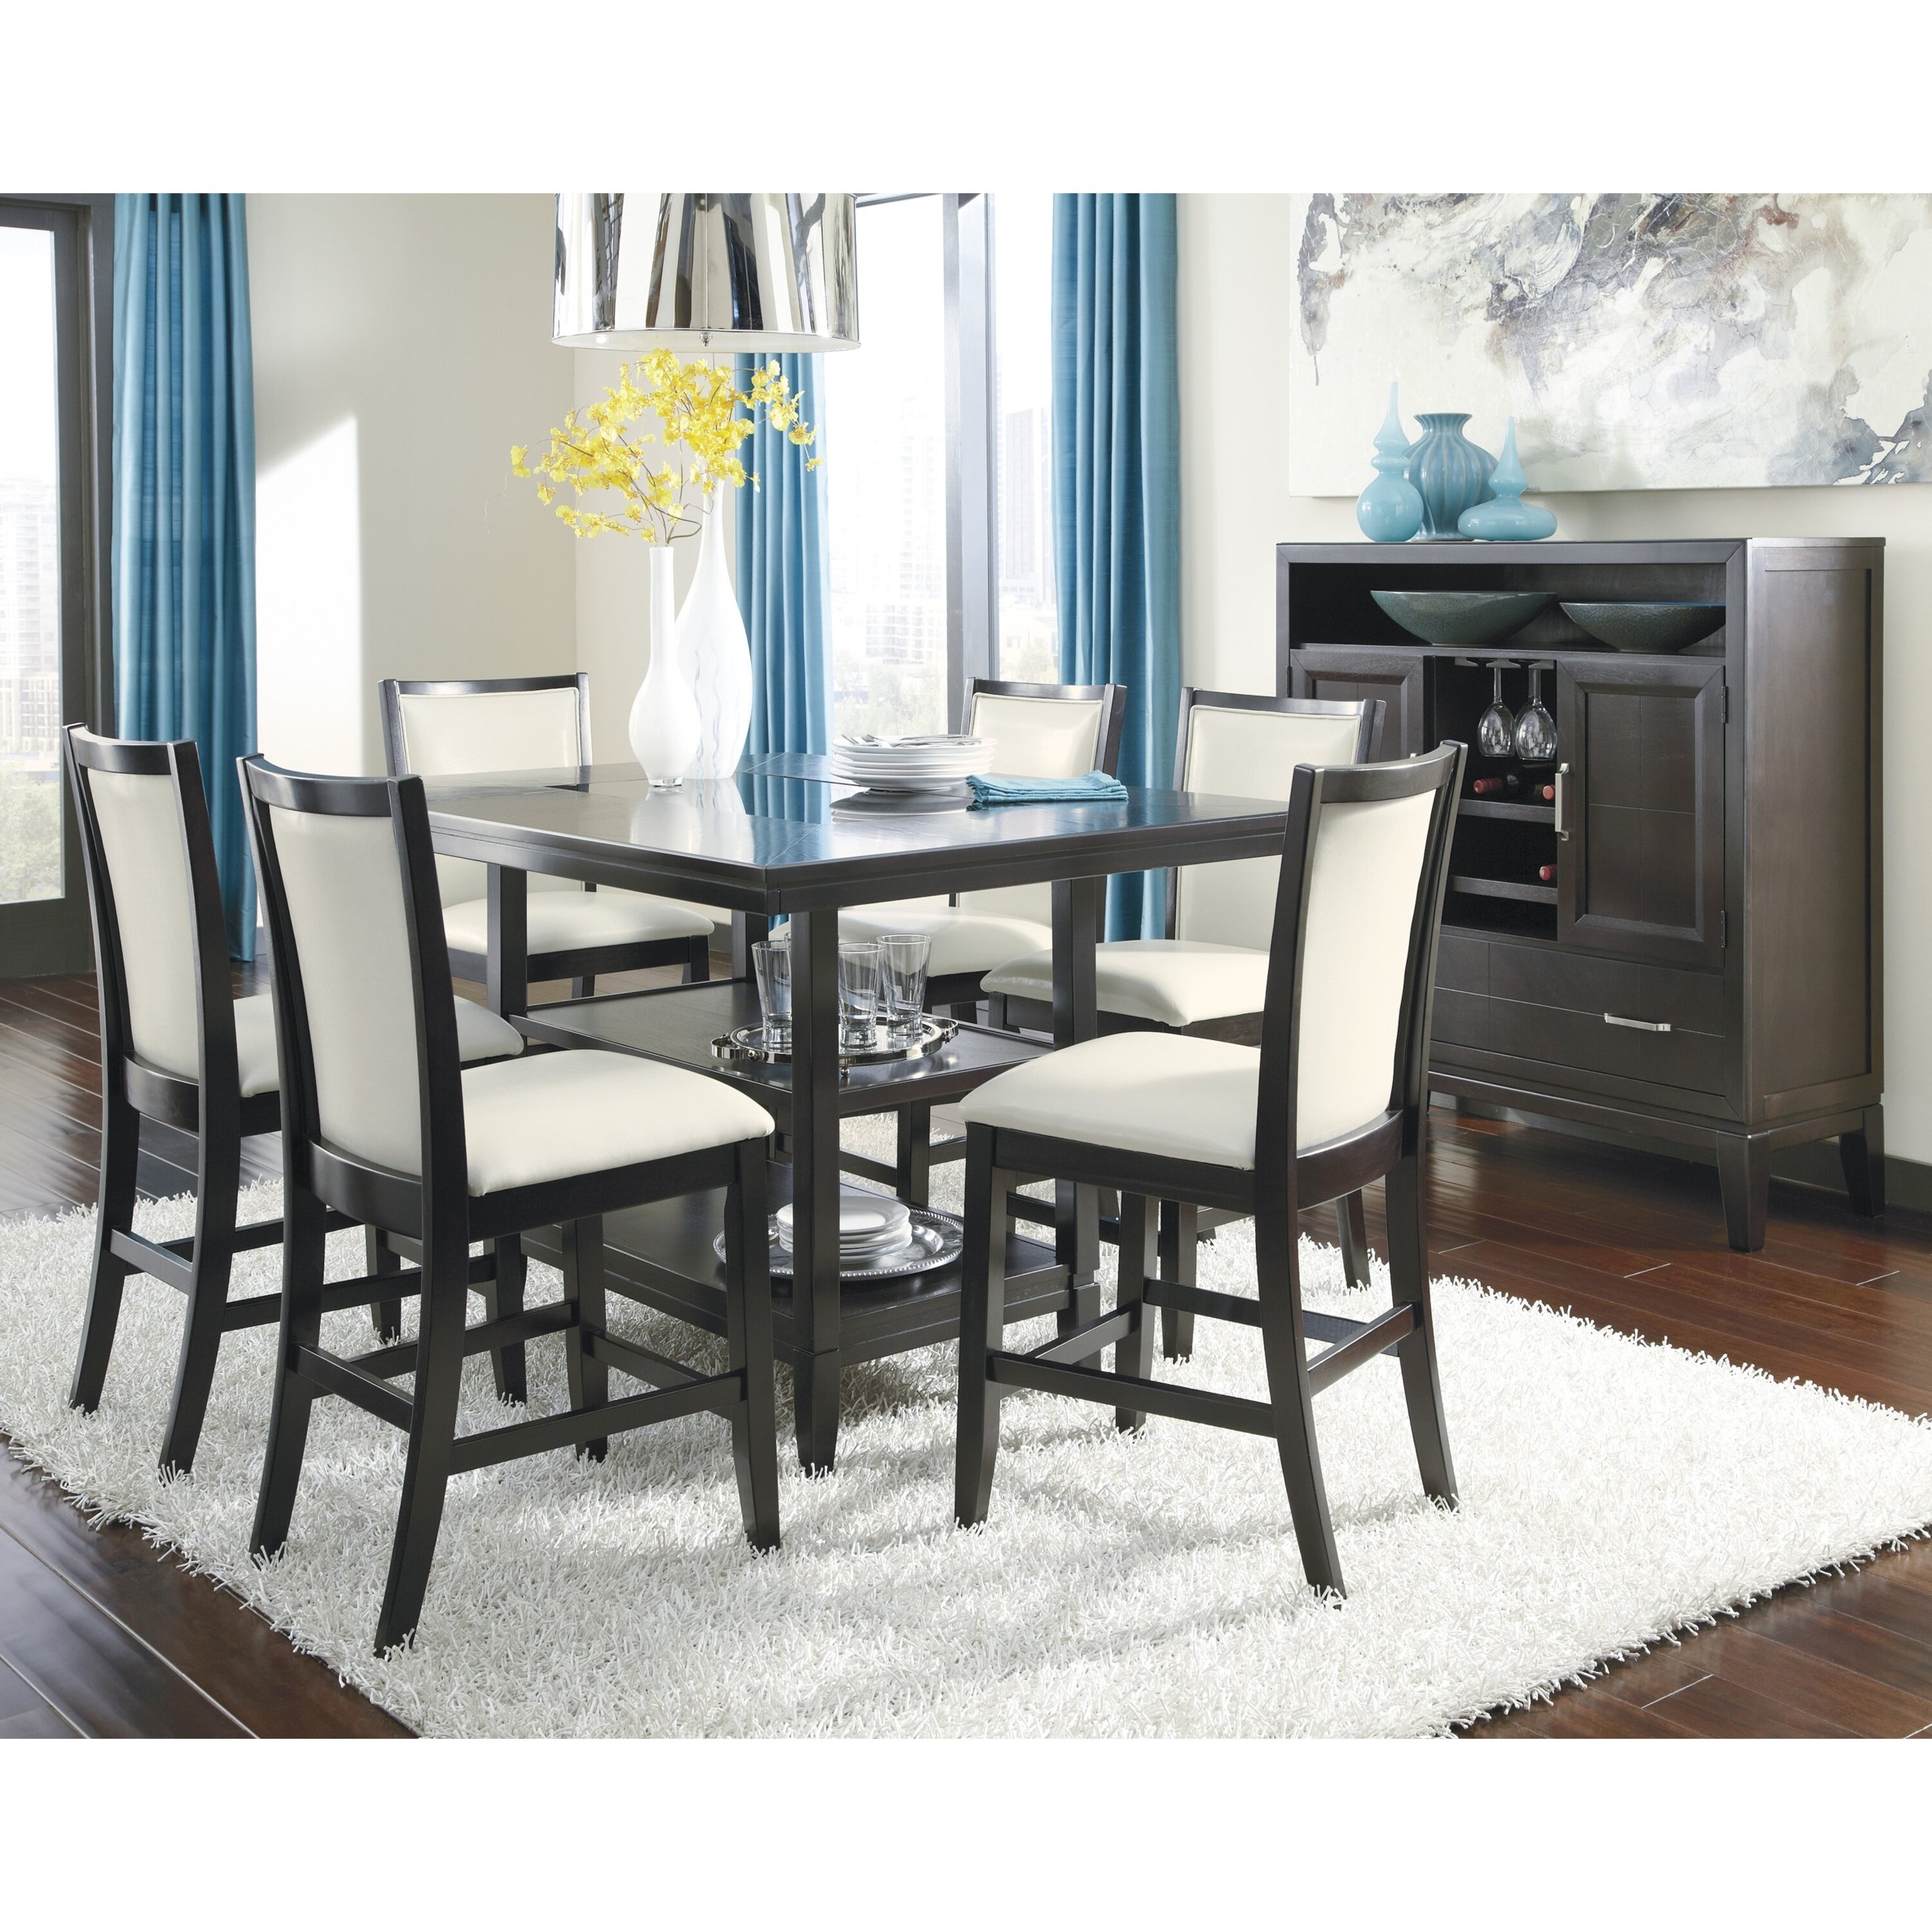 Signature design by ashley trishelle counter height dining 2